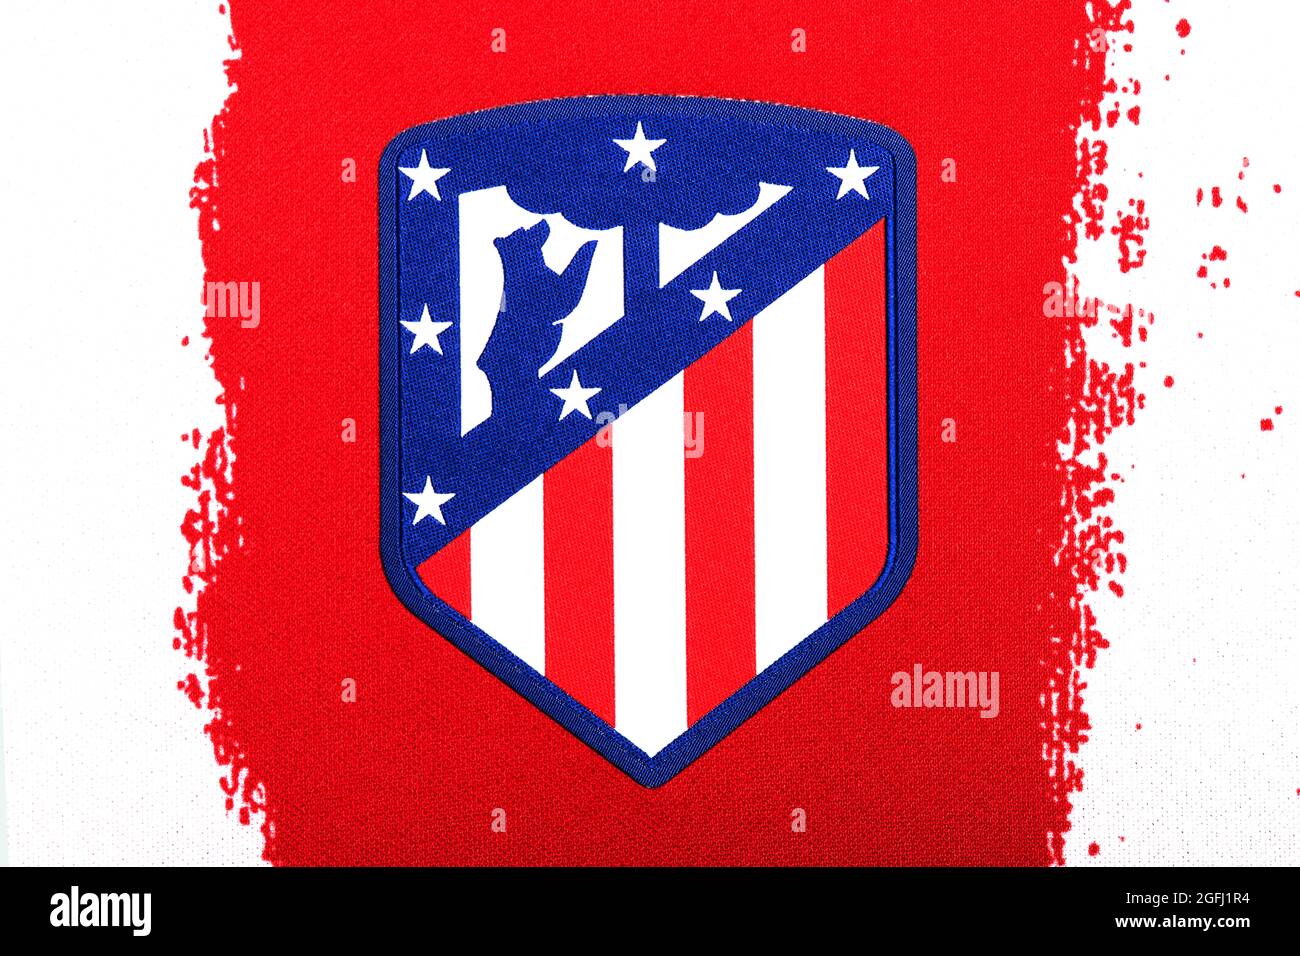 Atletico Madrid Football Club Flag and Coat of Arms Team in the New Super  League Championship Editorial Stock Photo - Illustration of football,  atletico: 216645283